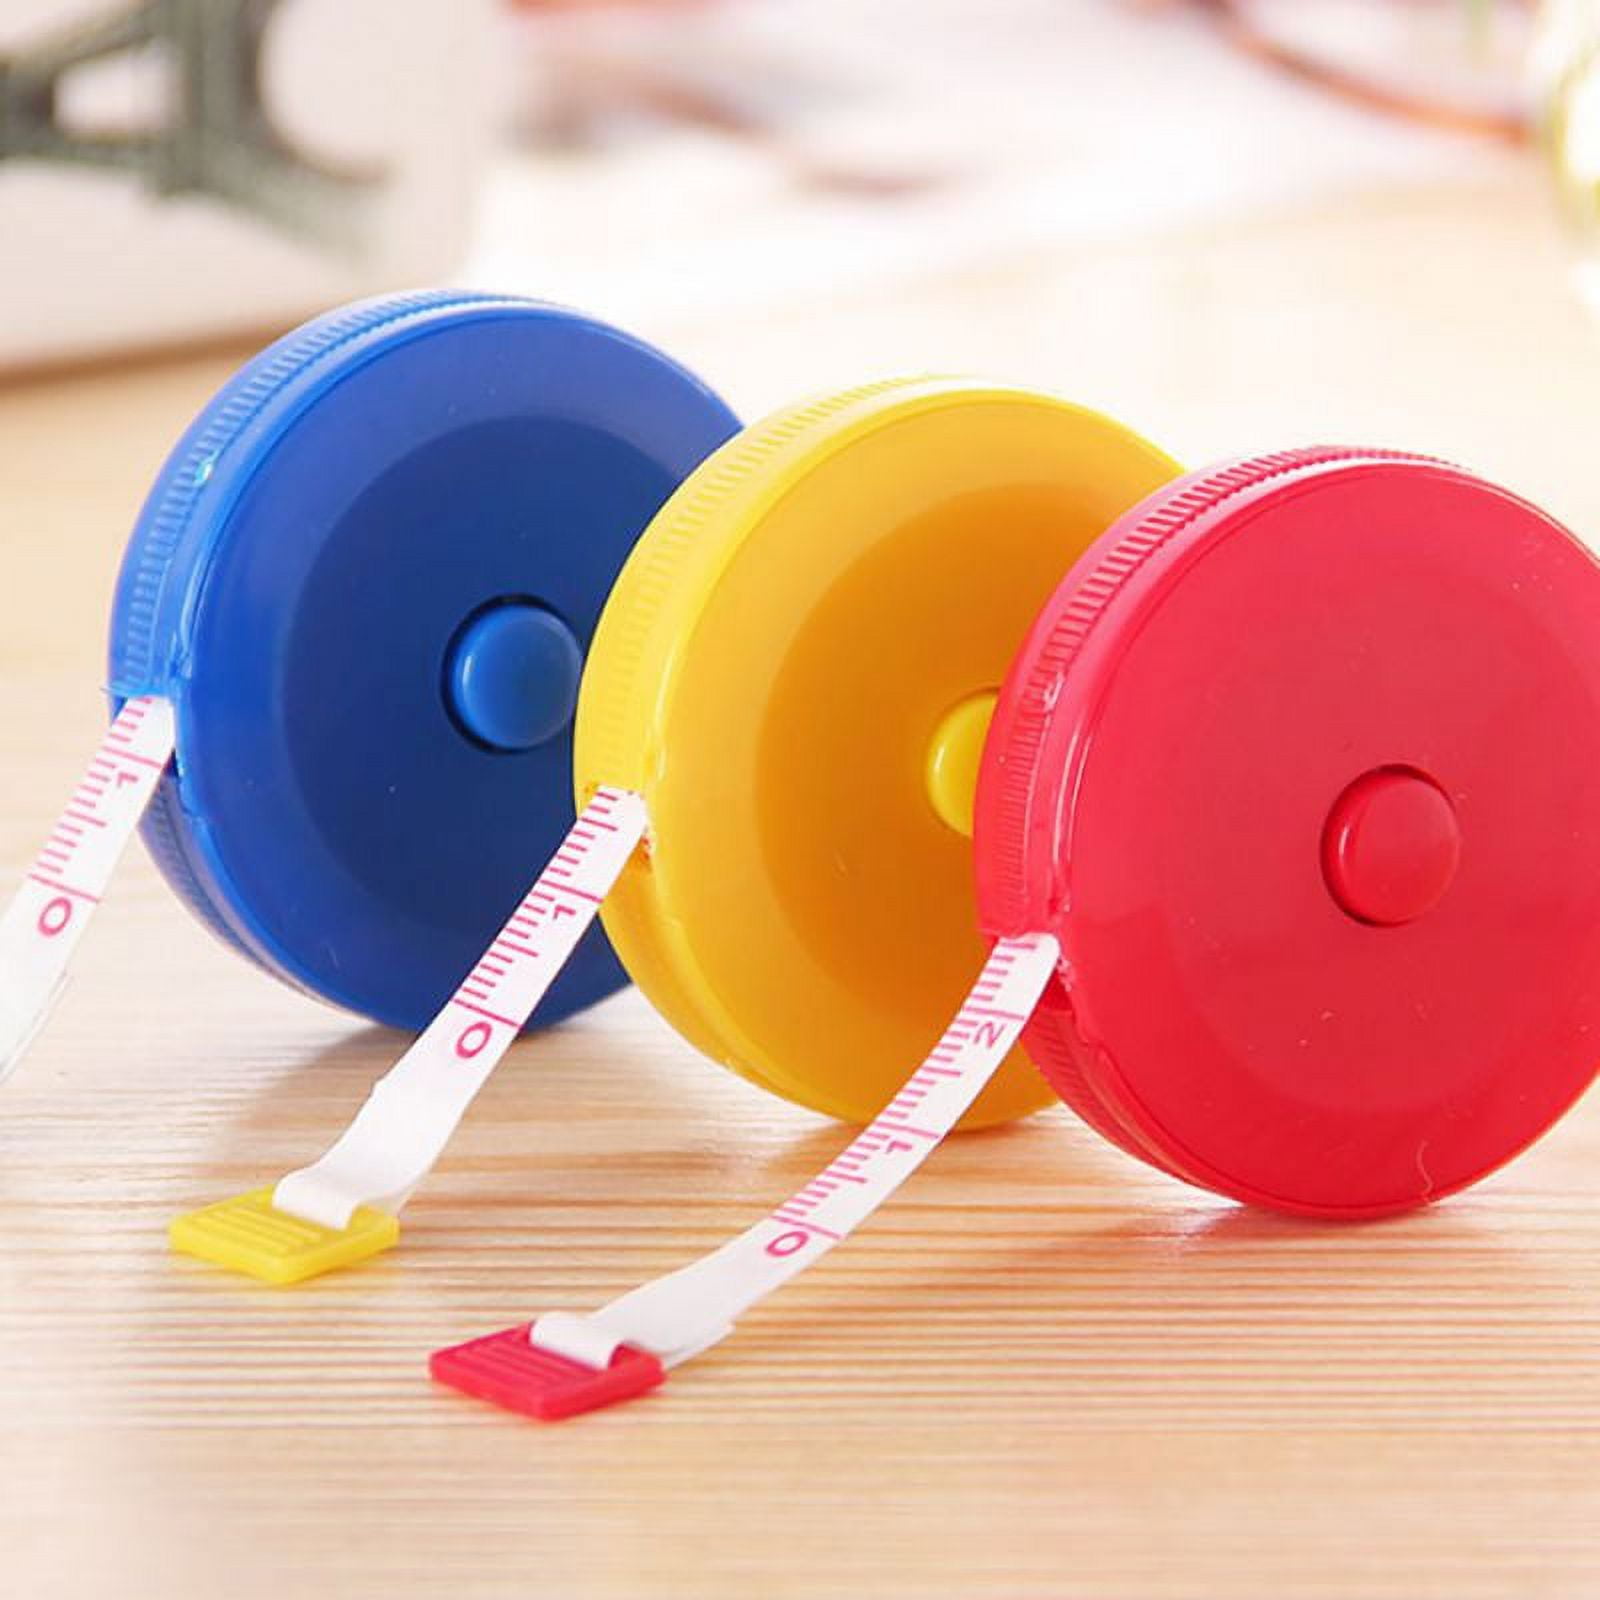 New Lon0167 Seamstress Sewing Featured Diet Plastic Ruler reliable efficacy  Metric Tape Measure 60 Red(id:202 e5 b0 42c)